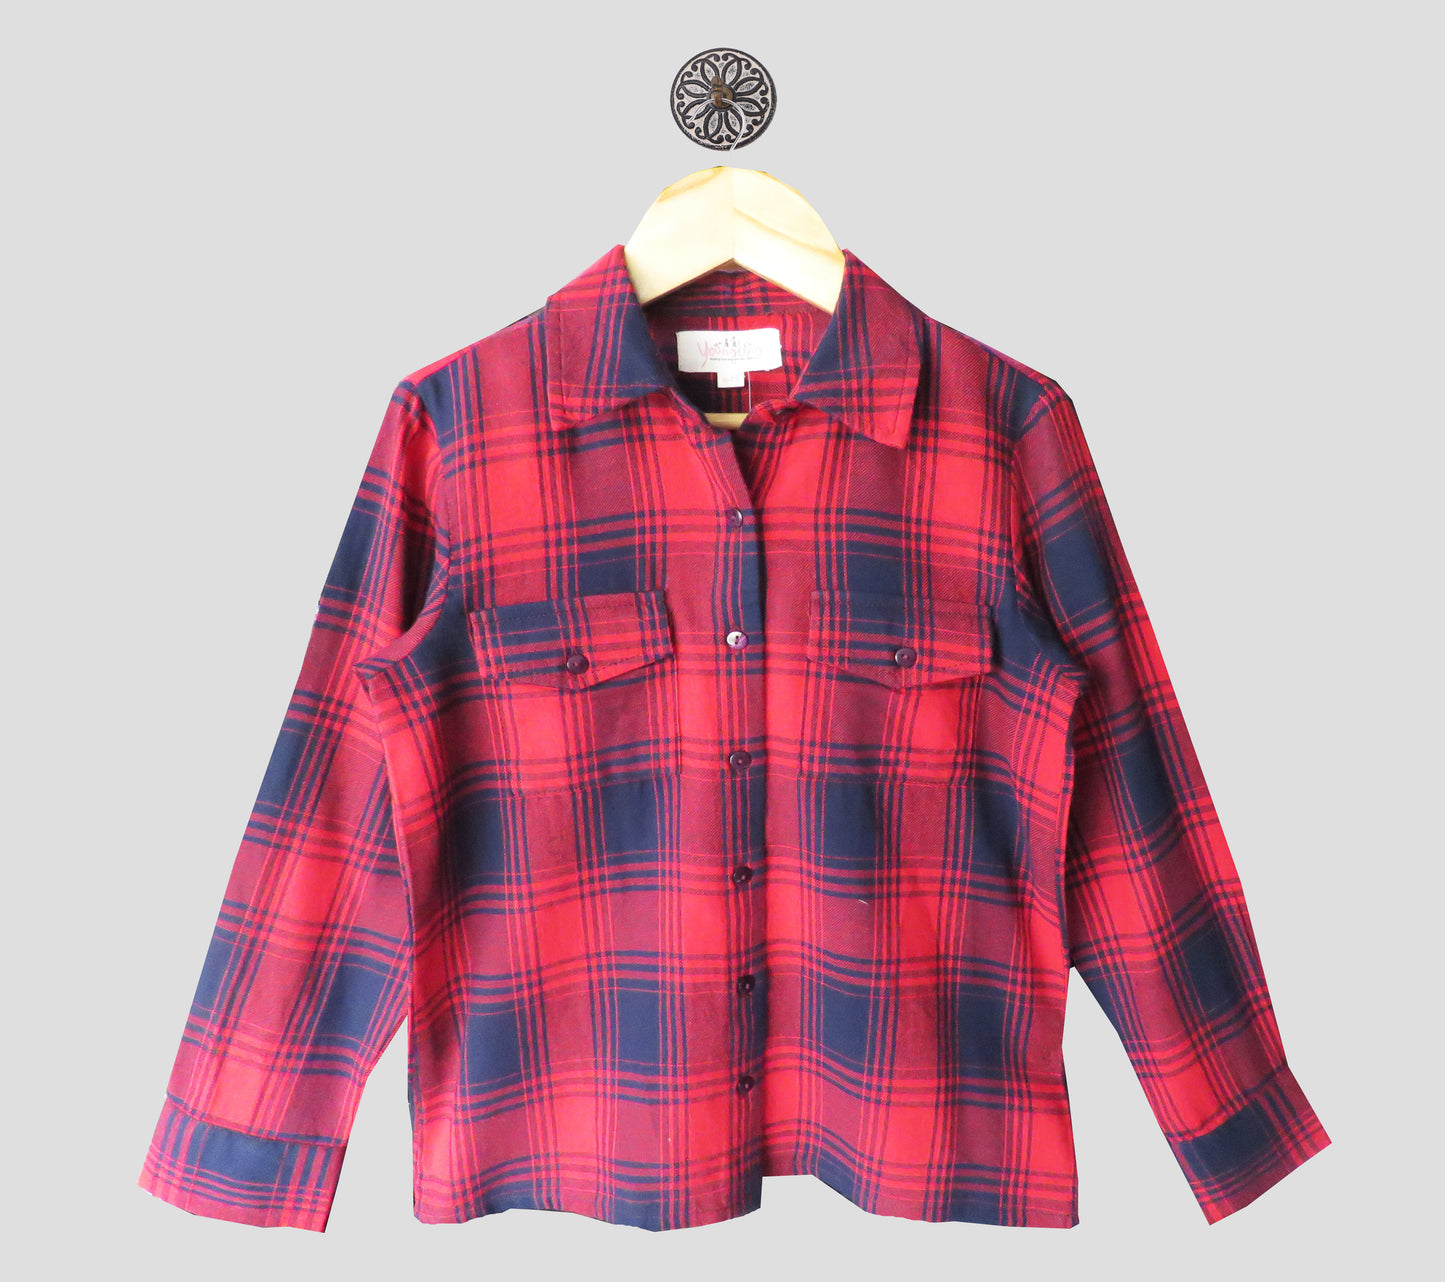 RED AND BLUE CHECKED CASUAL SHIRT WITH FLAP CHEST POCKETS AND LONG SLEEVES